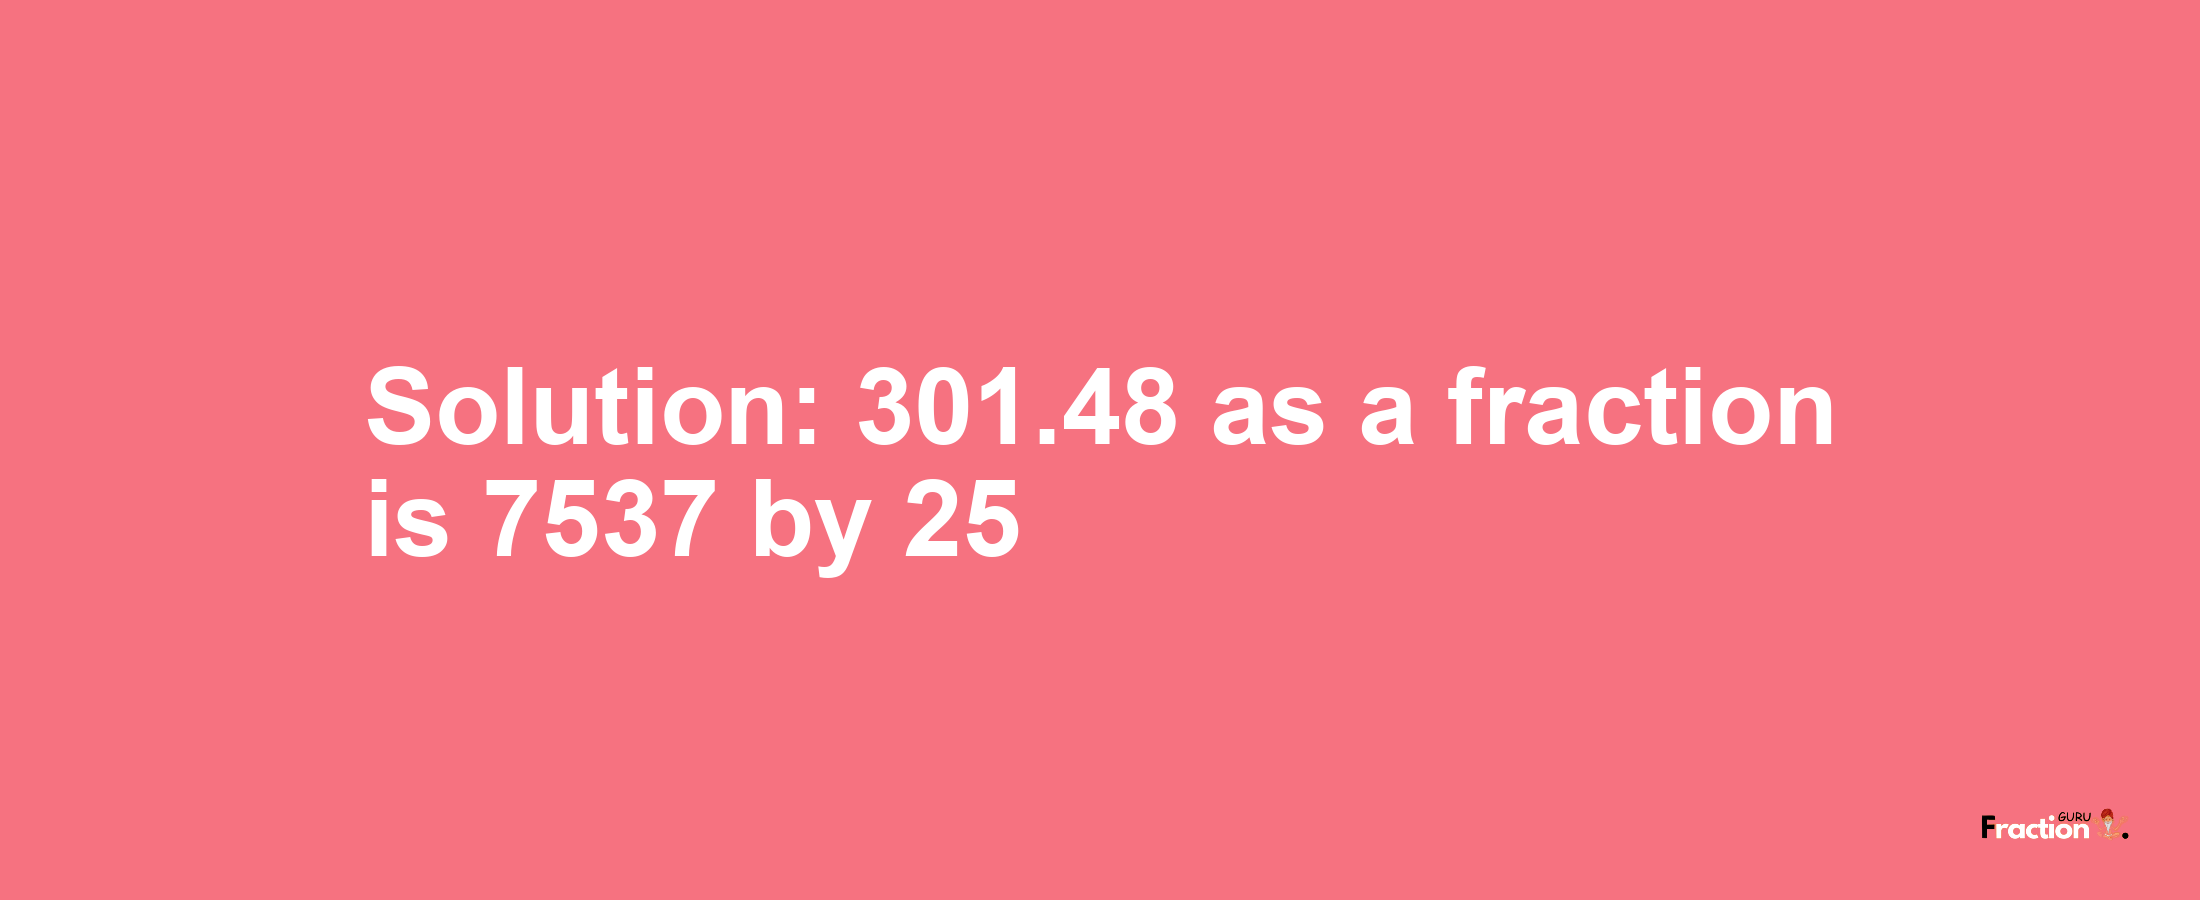 Solution:301.48 as a fraction is 7537/25